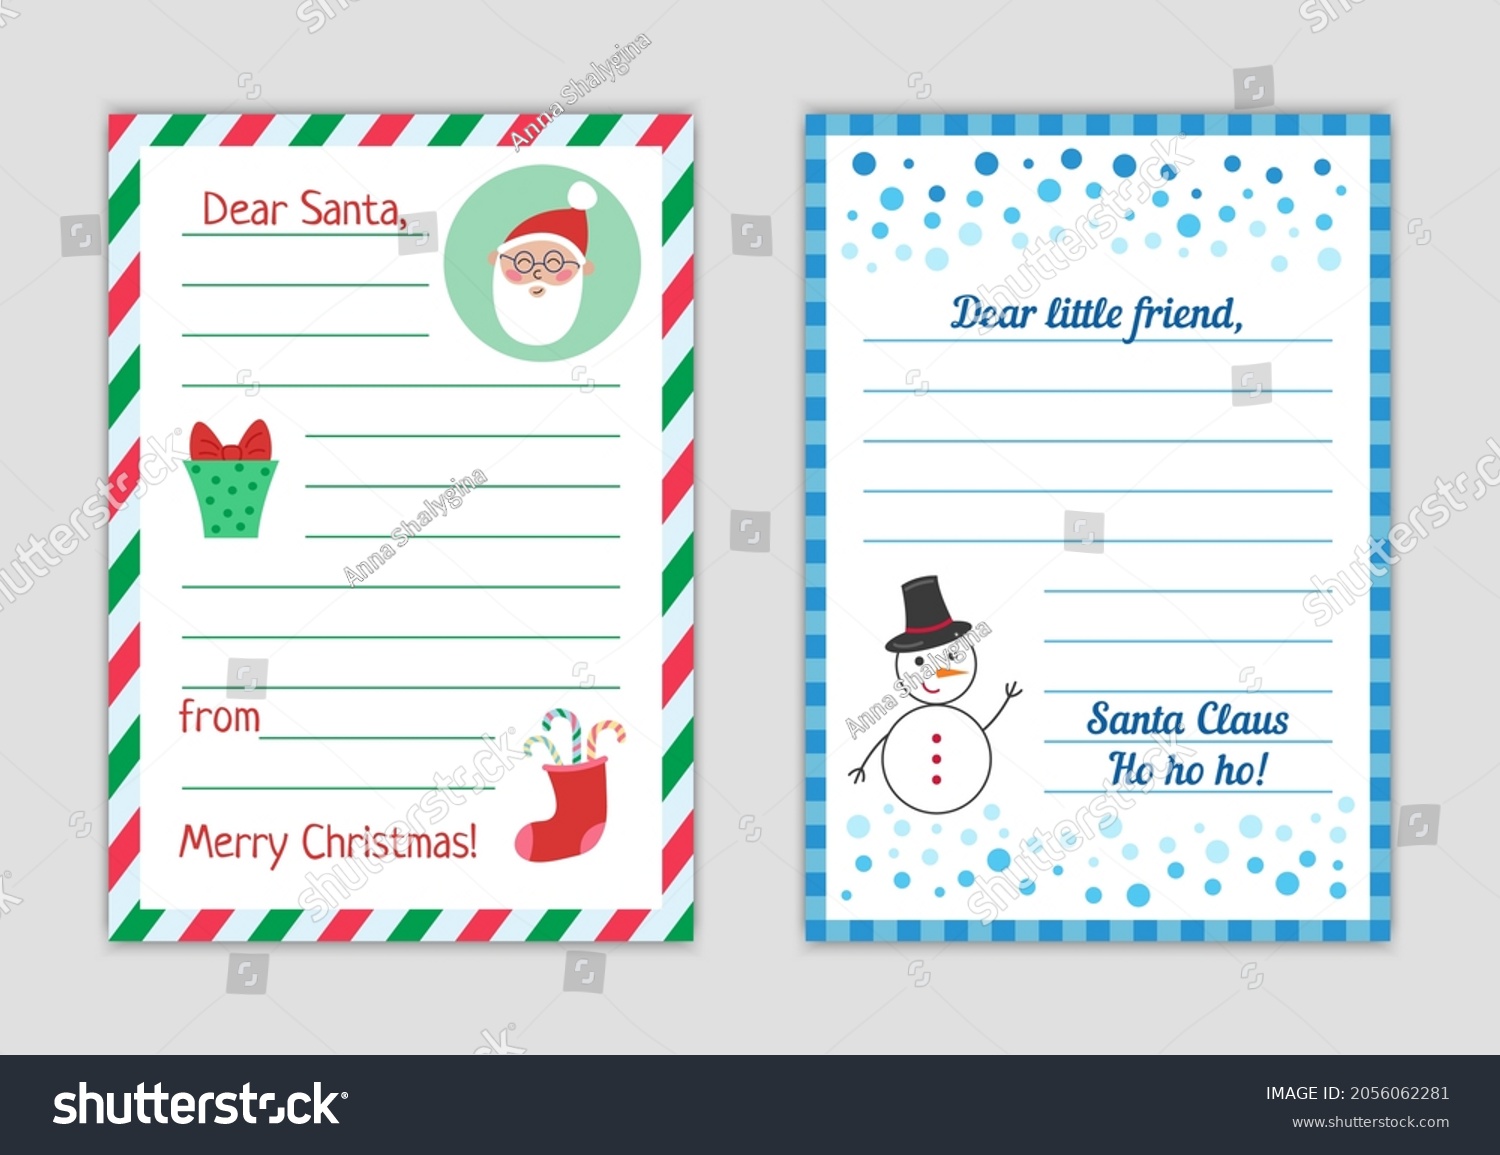 SVG of Letter to Santa from child. Christmas  wishlist blank isolated. Reply letter to kid. Vector cartoon template illustration. svg